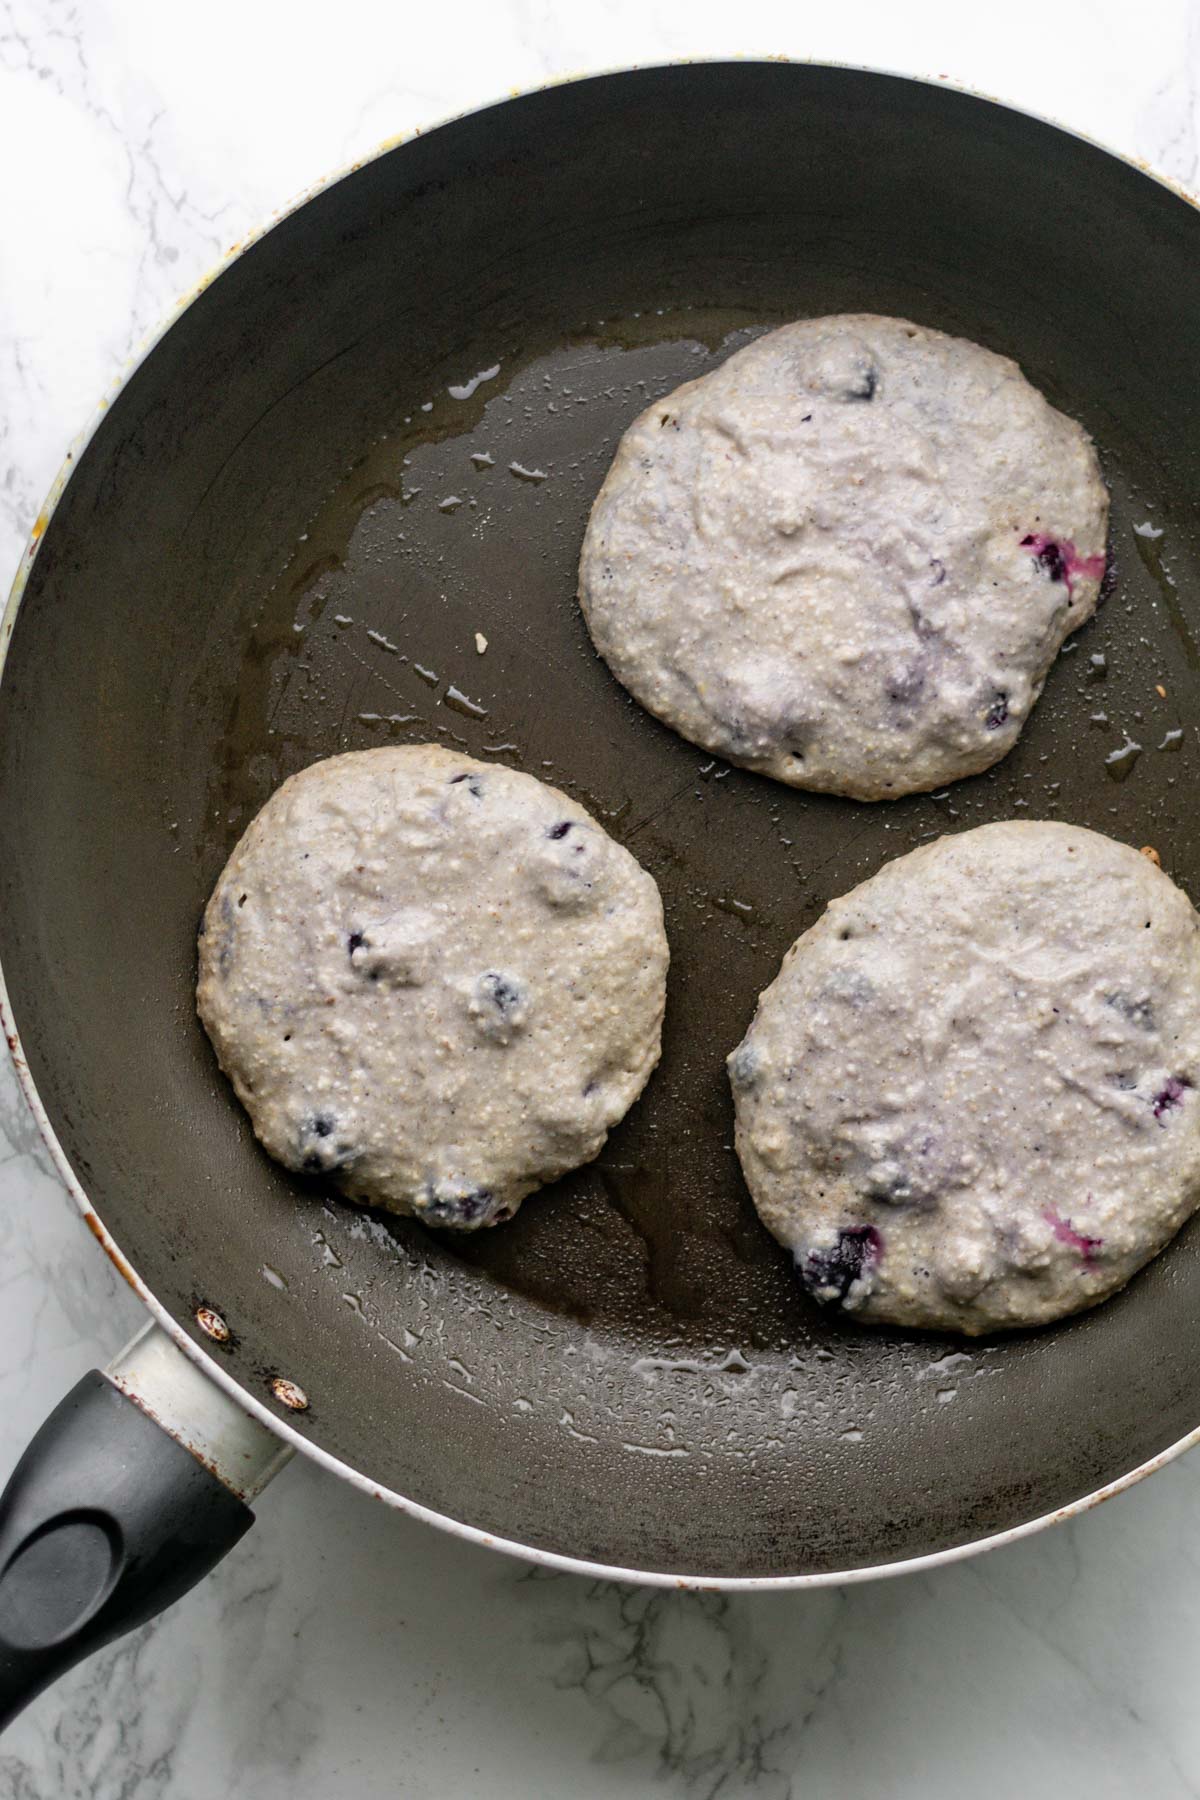 three blueberry pancakes being cooked in a pan